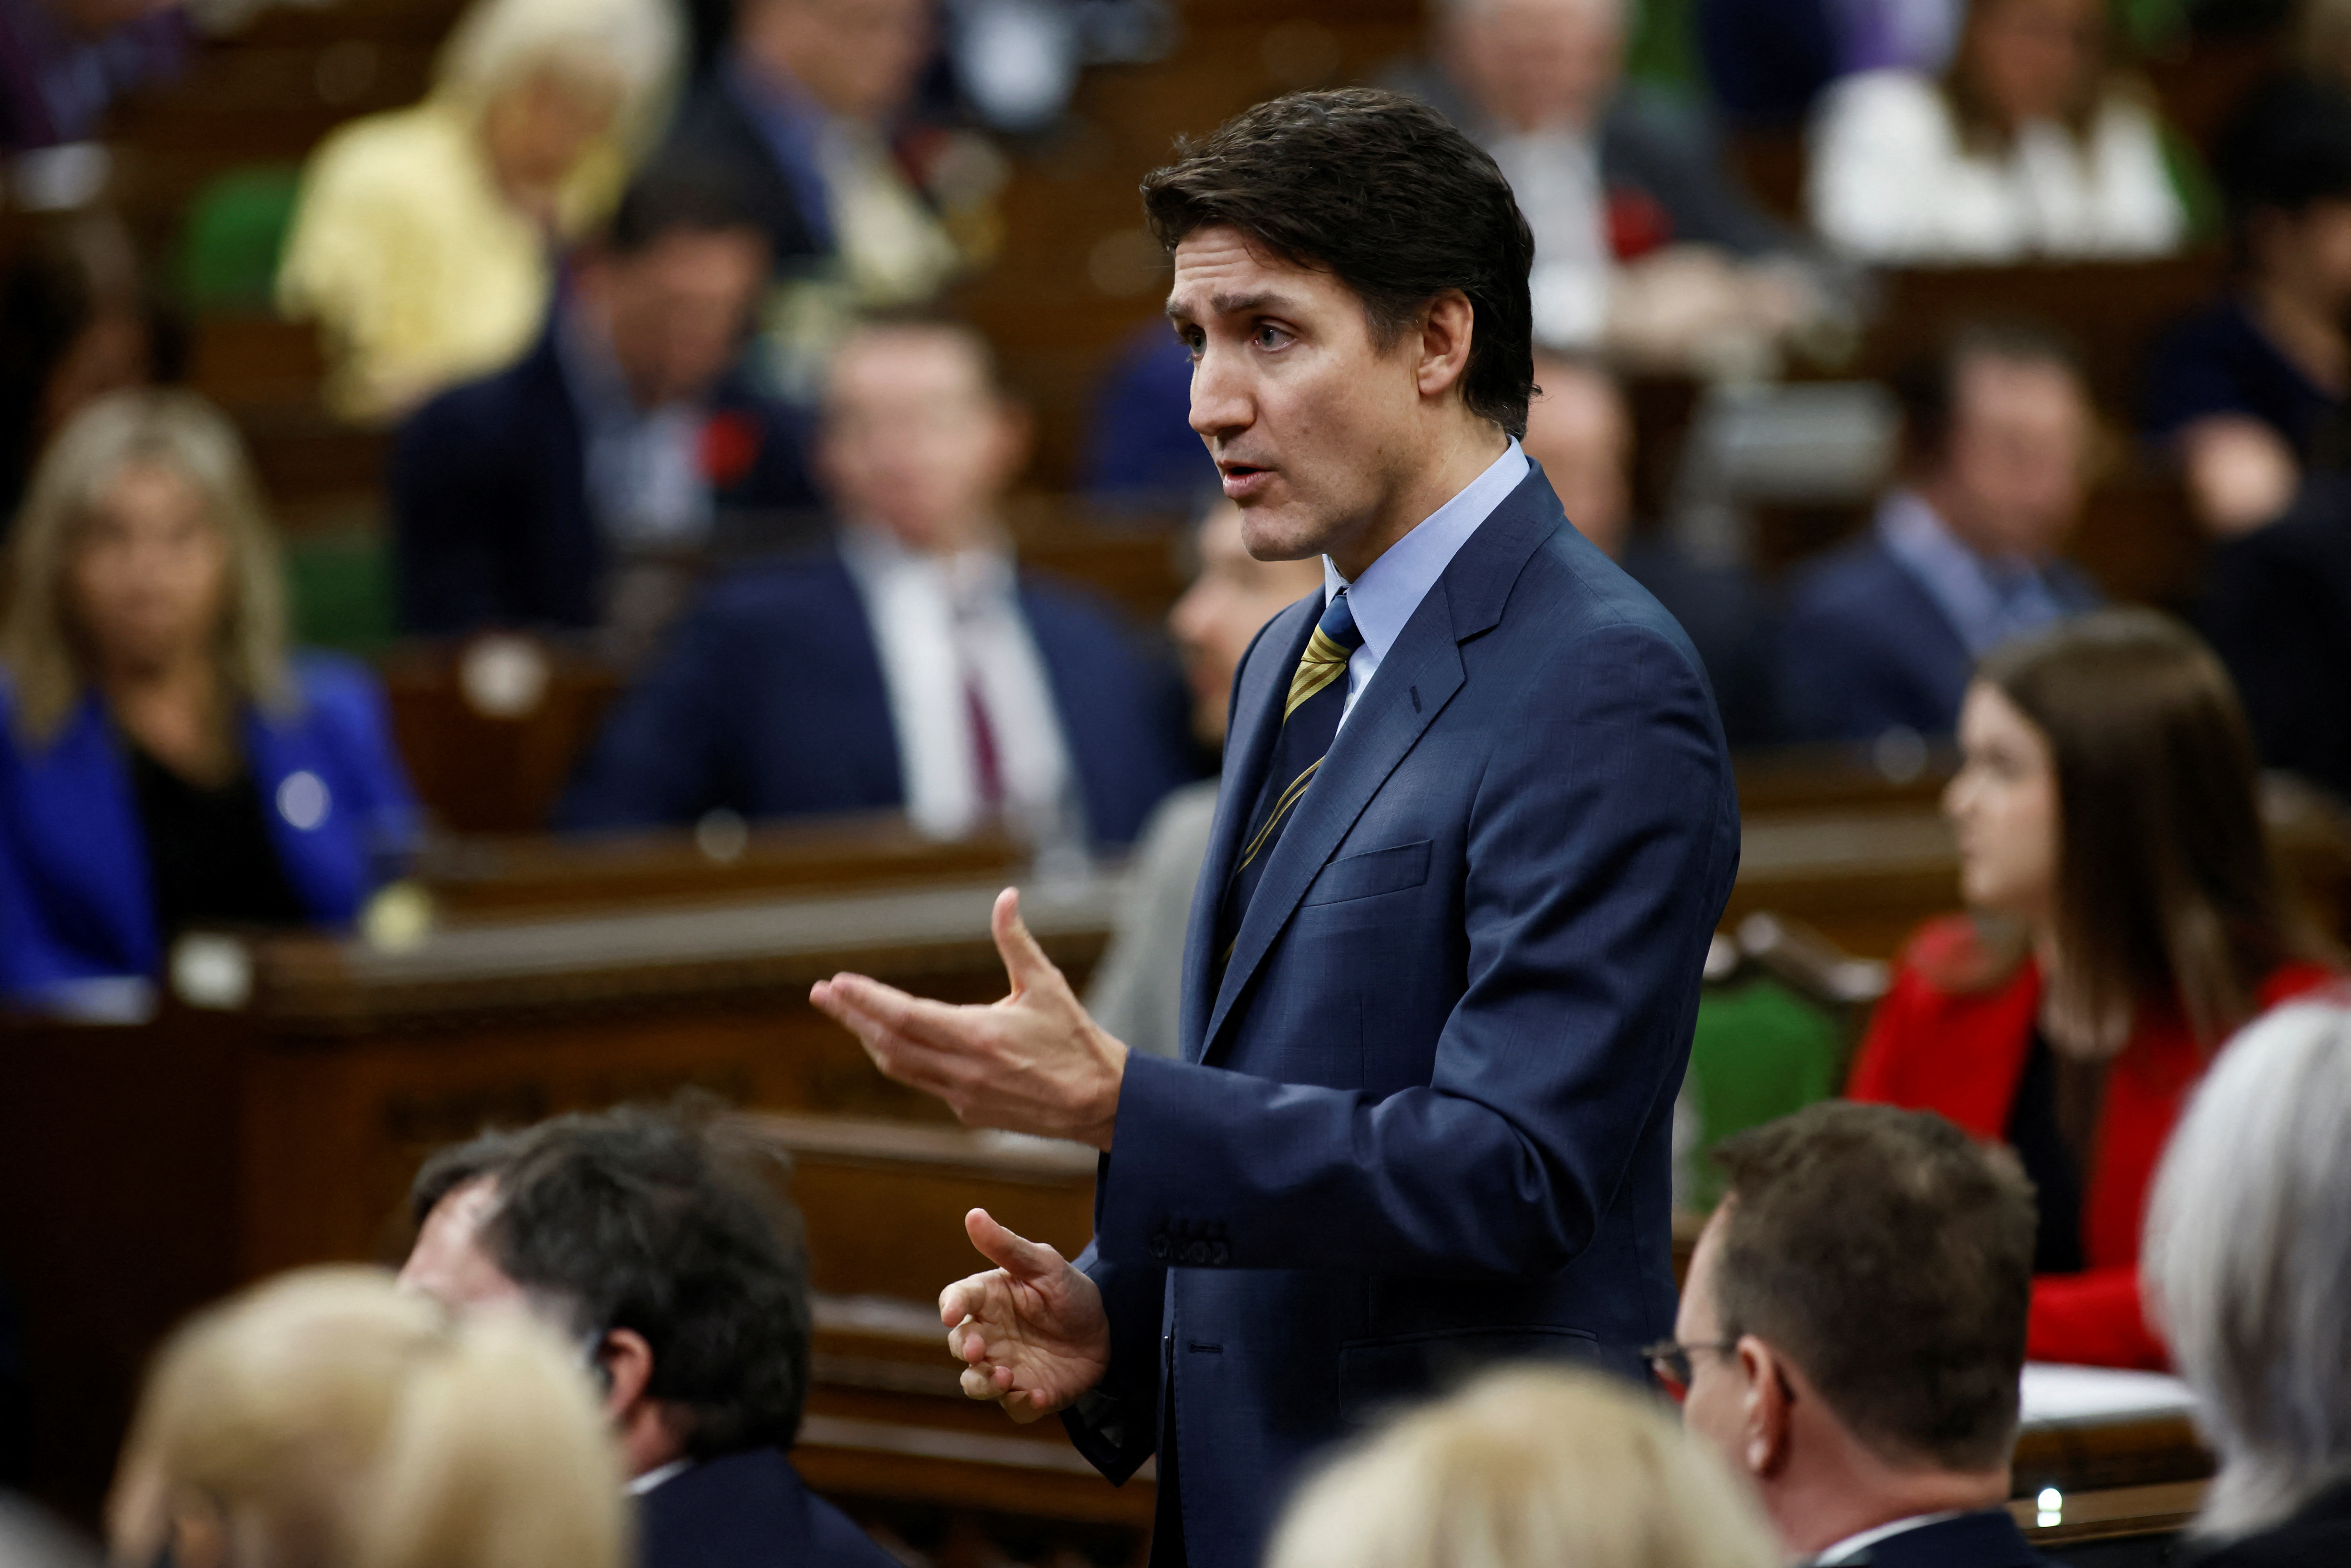 Parliament's Question Period resumes after ejection of Conservative leader in Ottawa